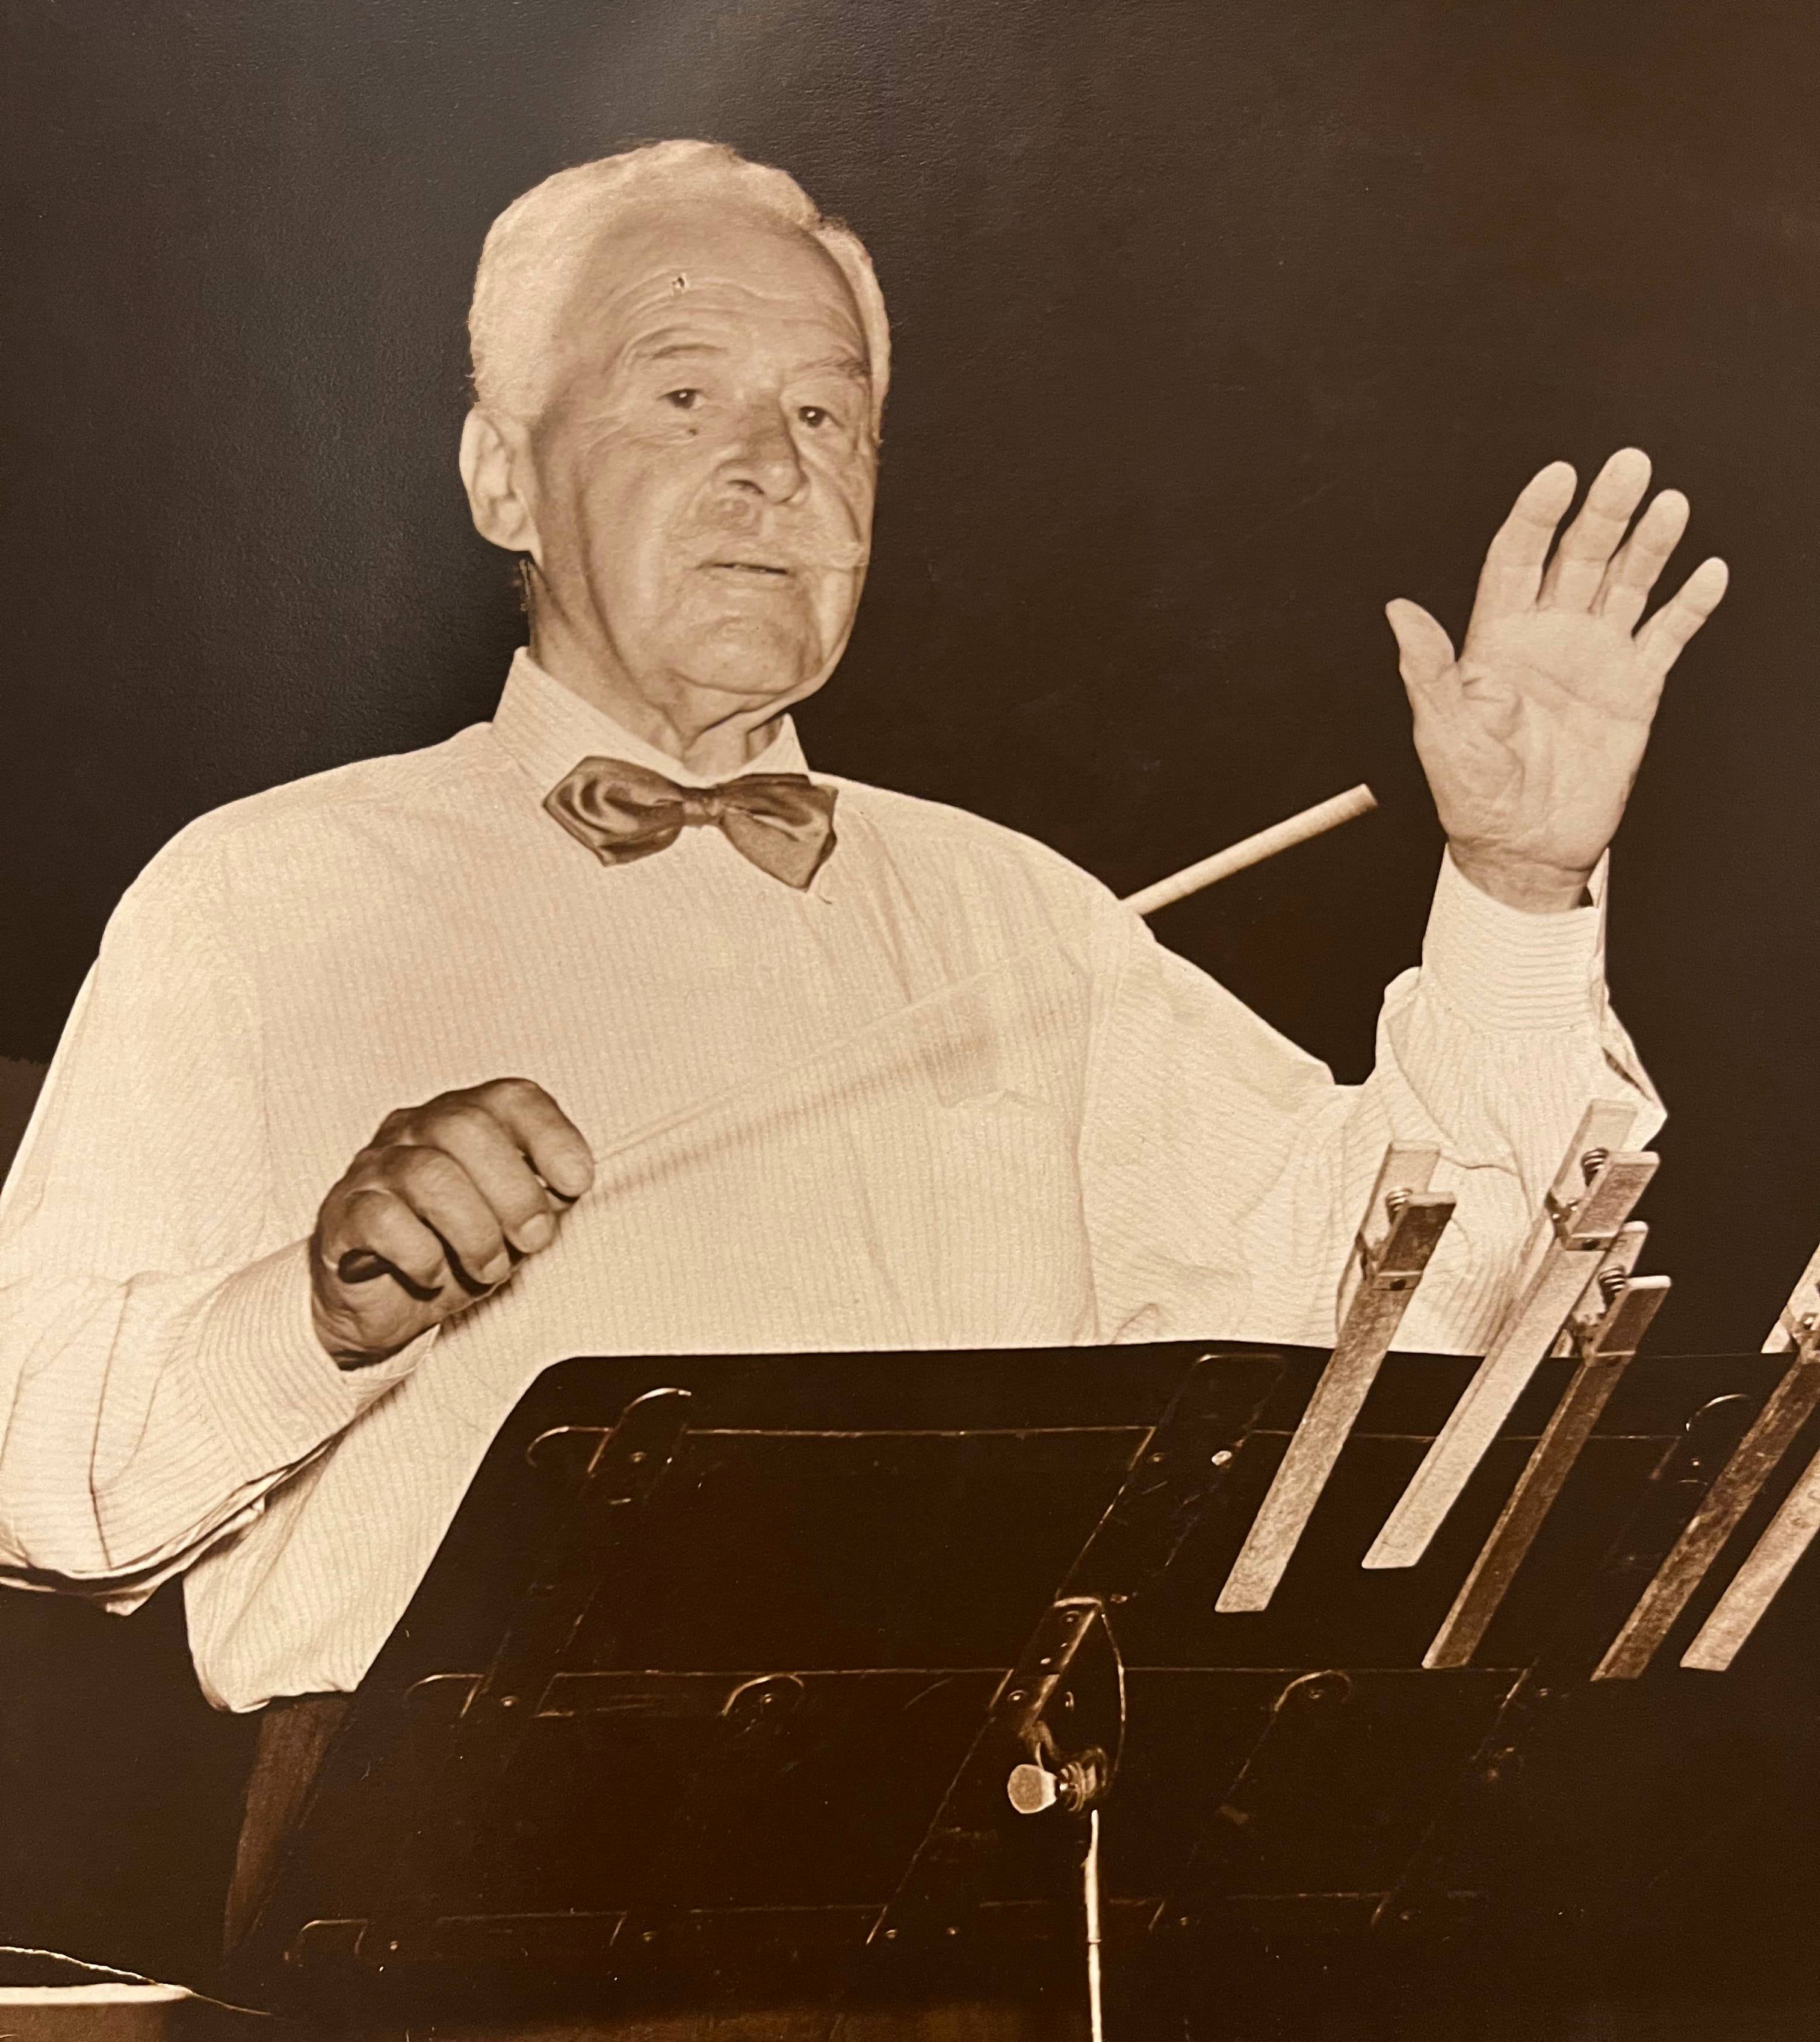 Ernest W. Stiller looking into the camera while conducting